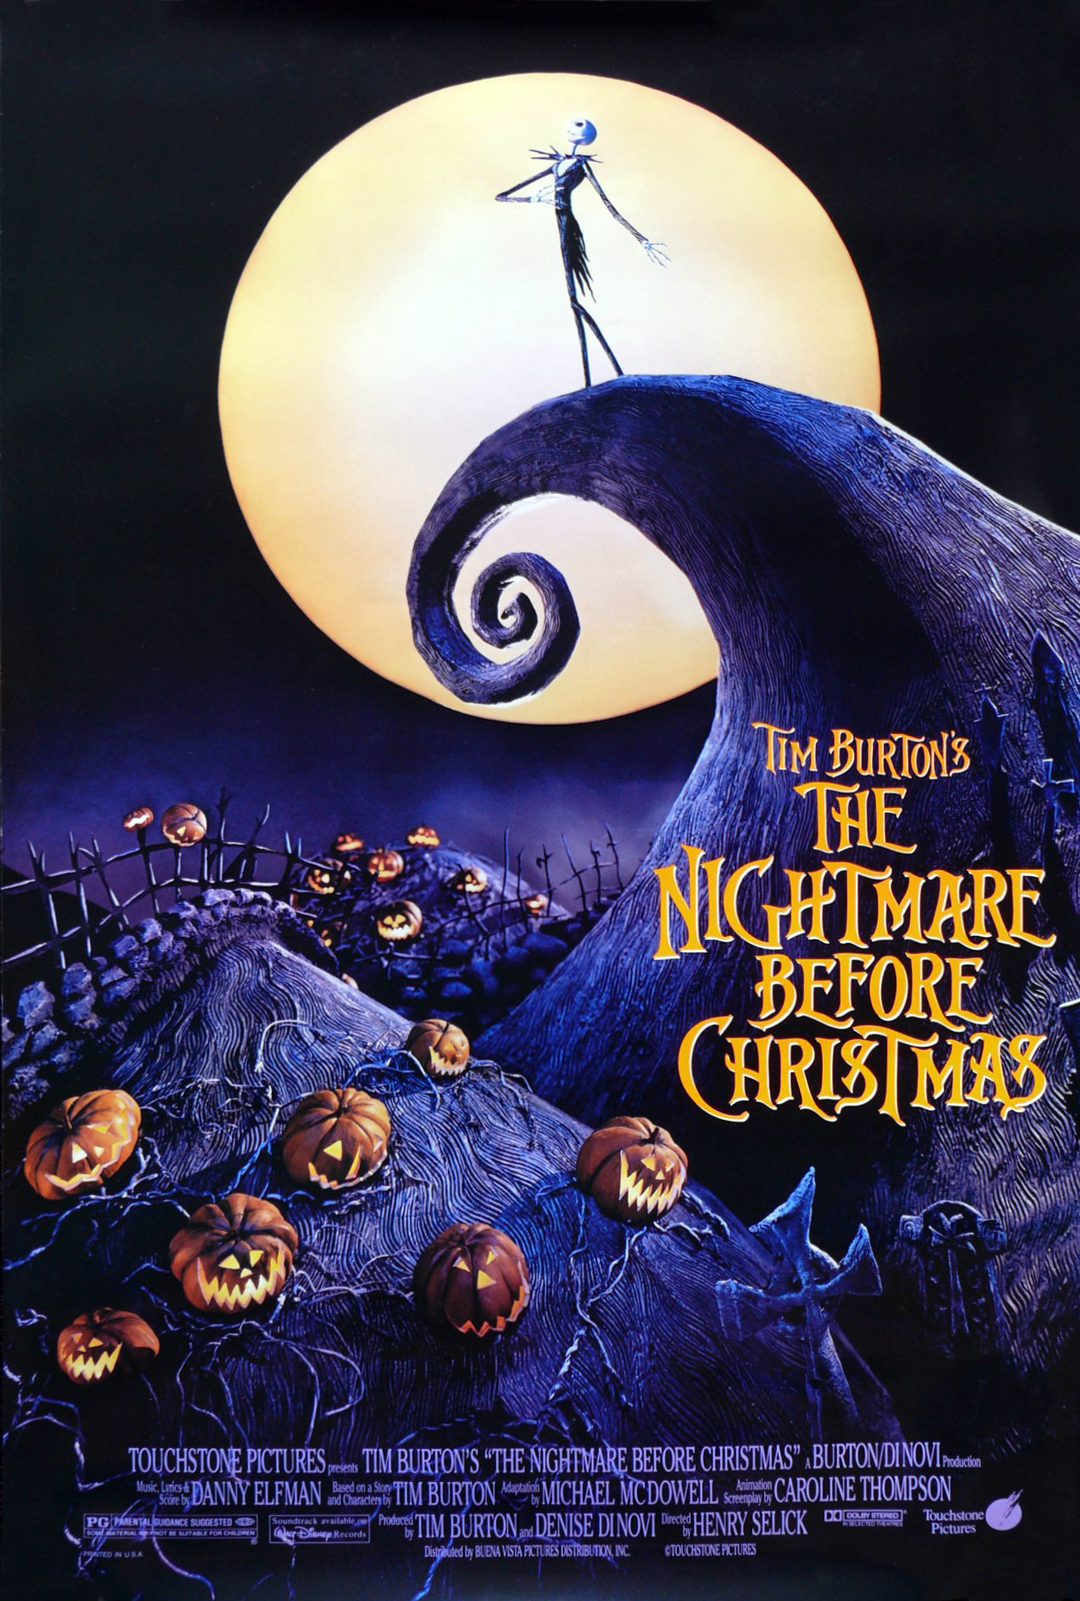 THE NIGHTMARE BEFORE CHRISTMAS | Dallas/Fort Worth | Alamo Drafthouse ...